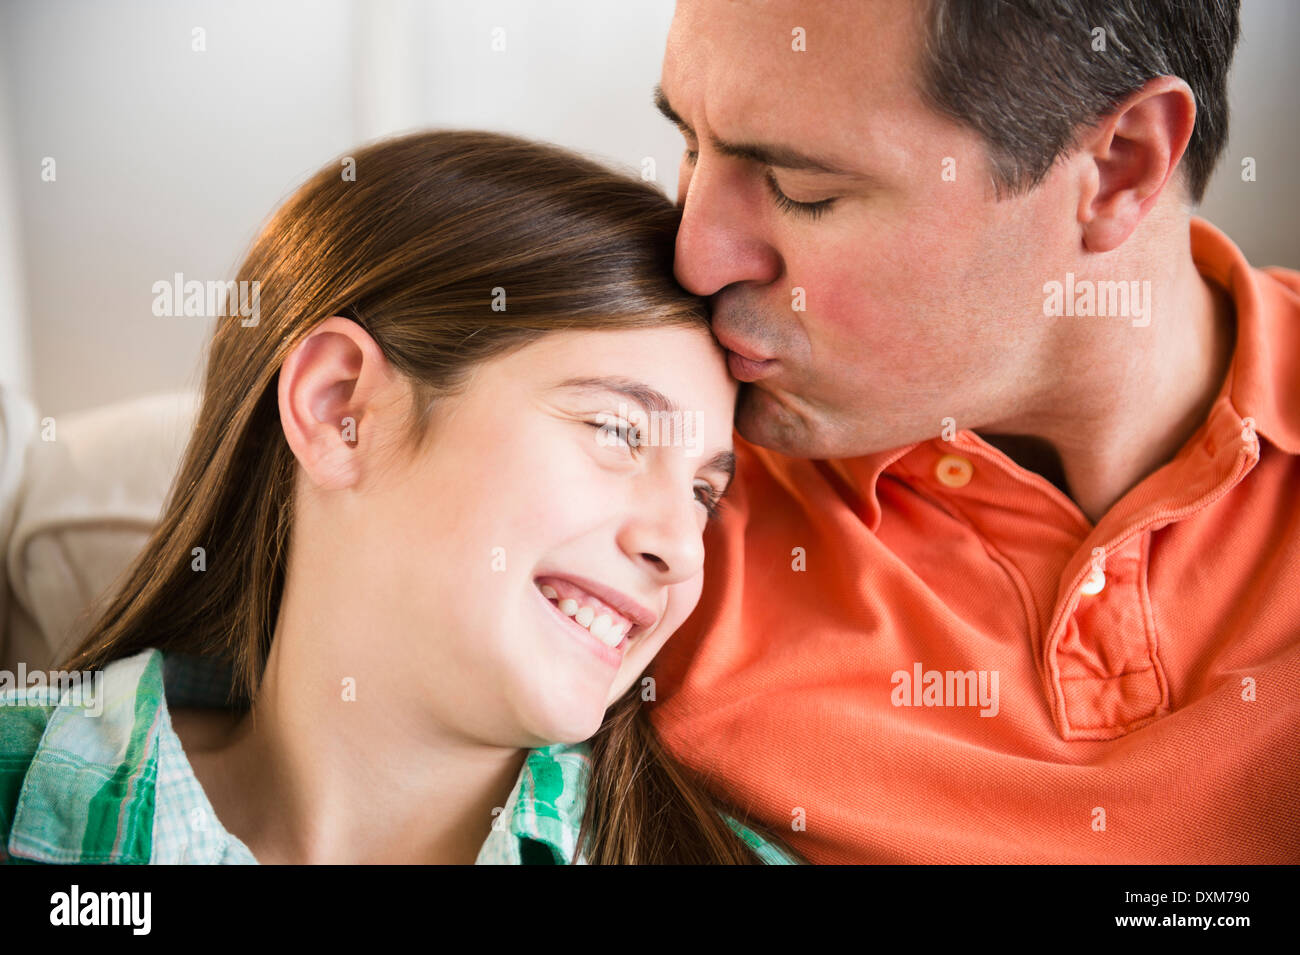 Caucasian father kissing daughter's forehead Stock Photo